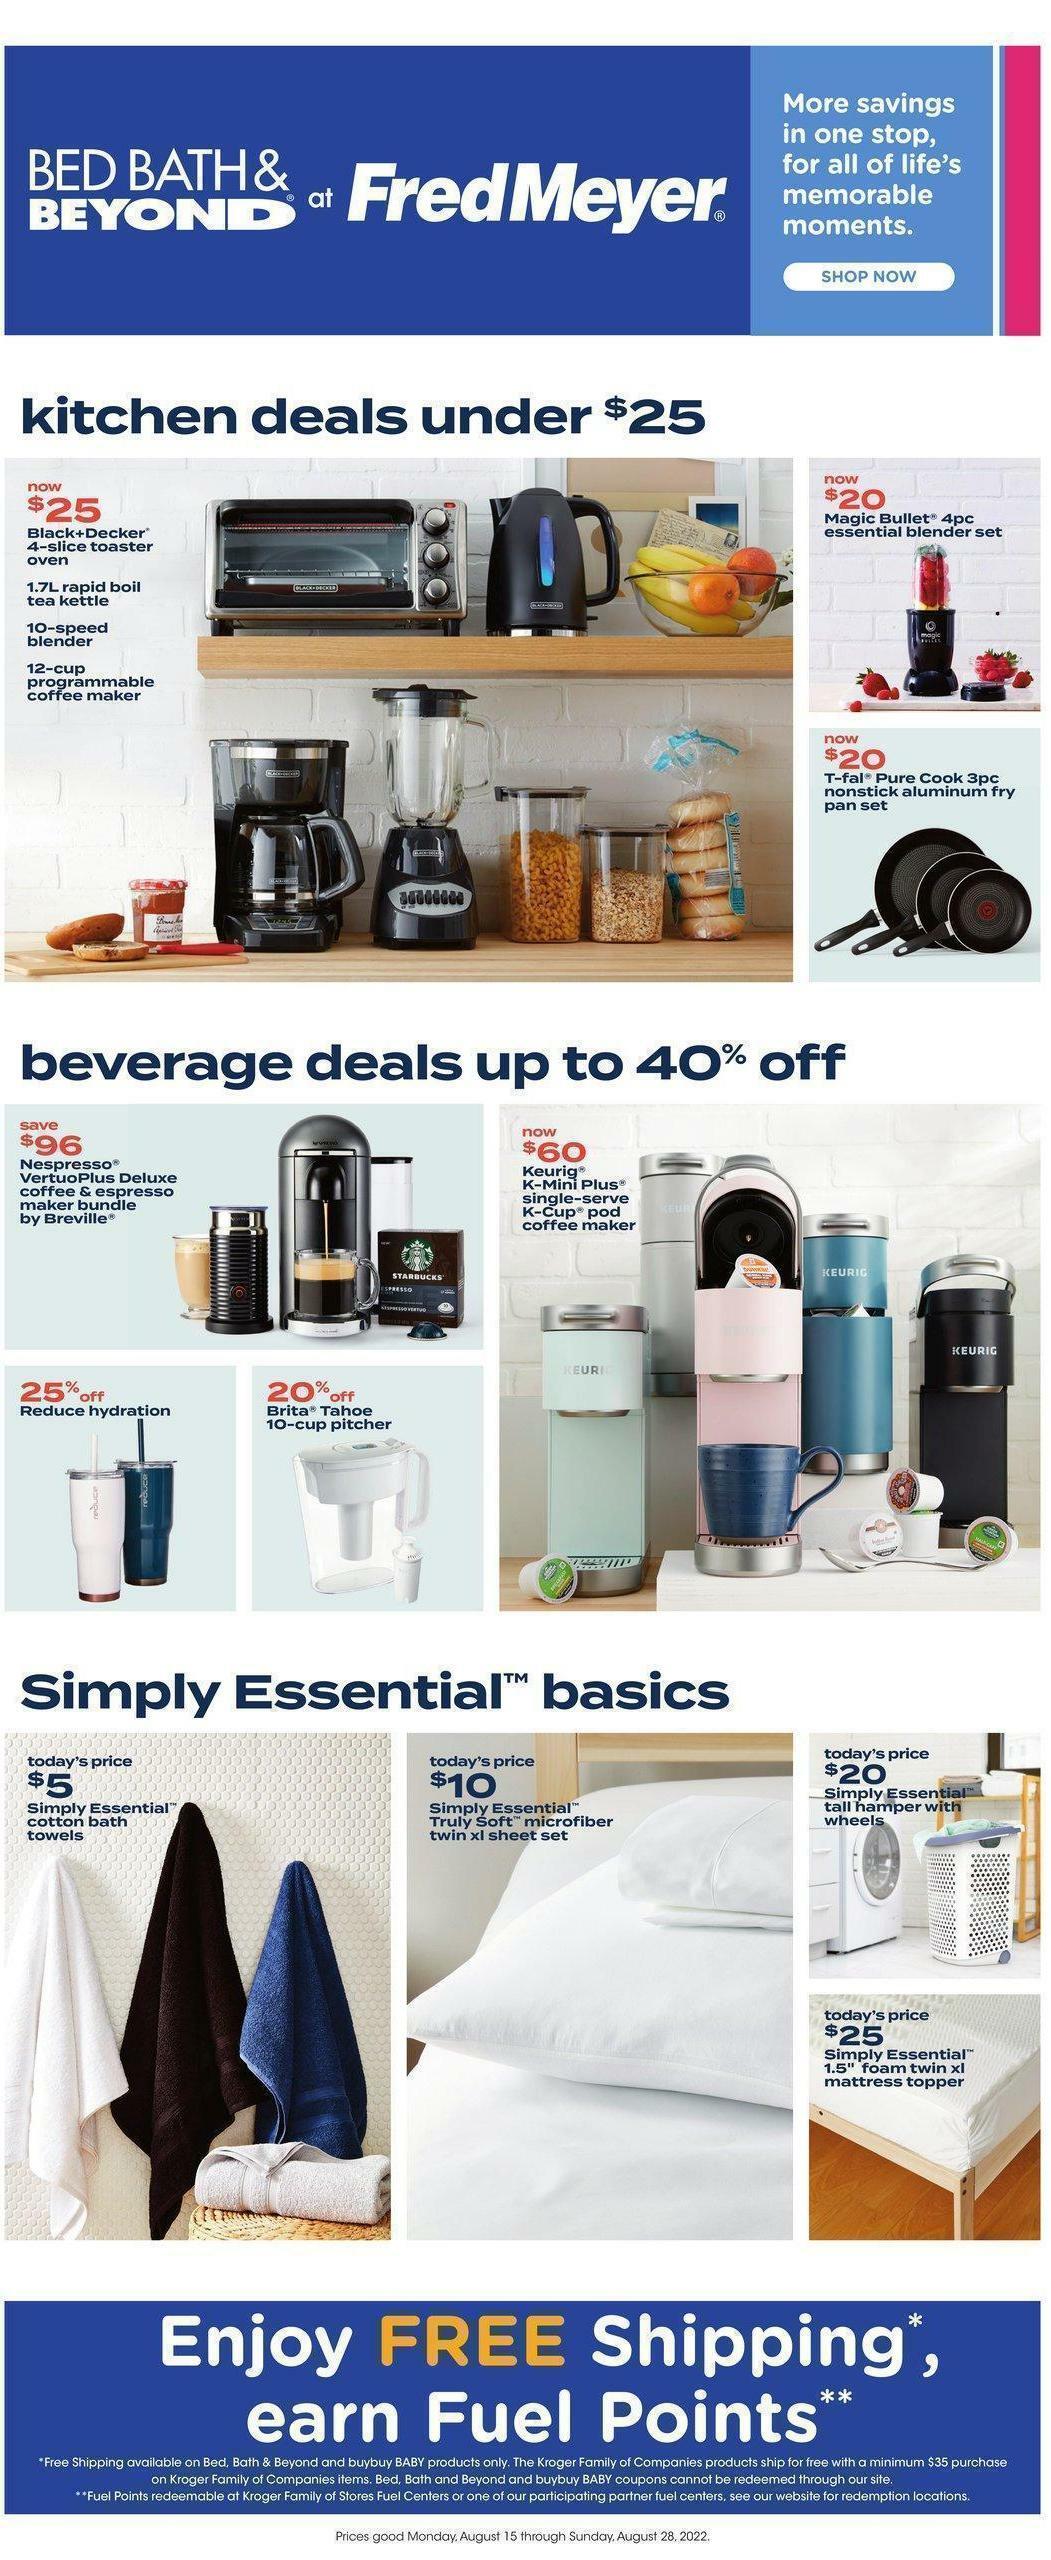 Fred Meyer Bed, Bath & Beyond Weekly Ad from August 15